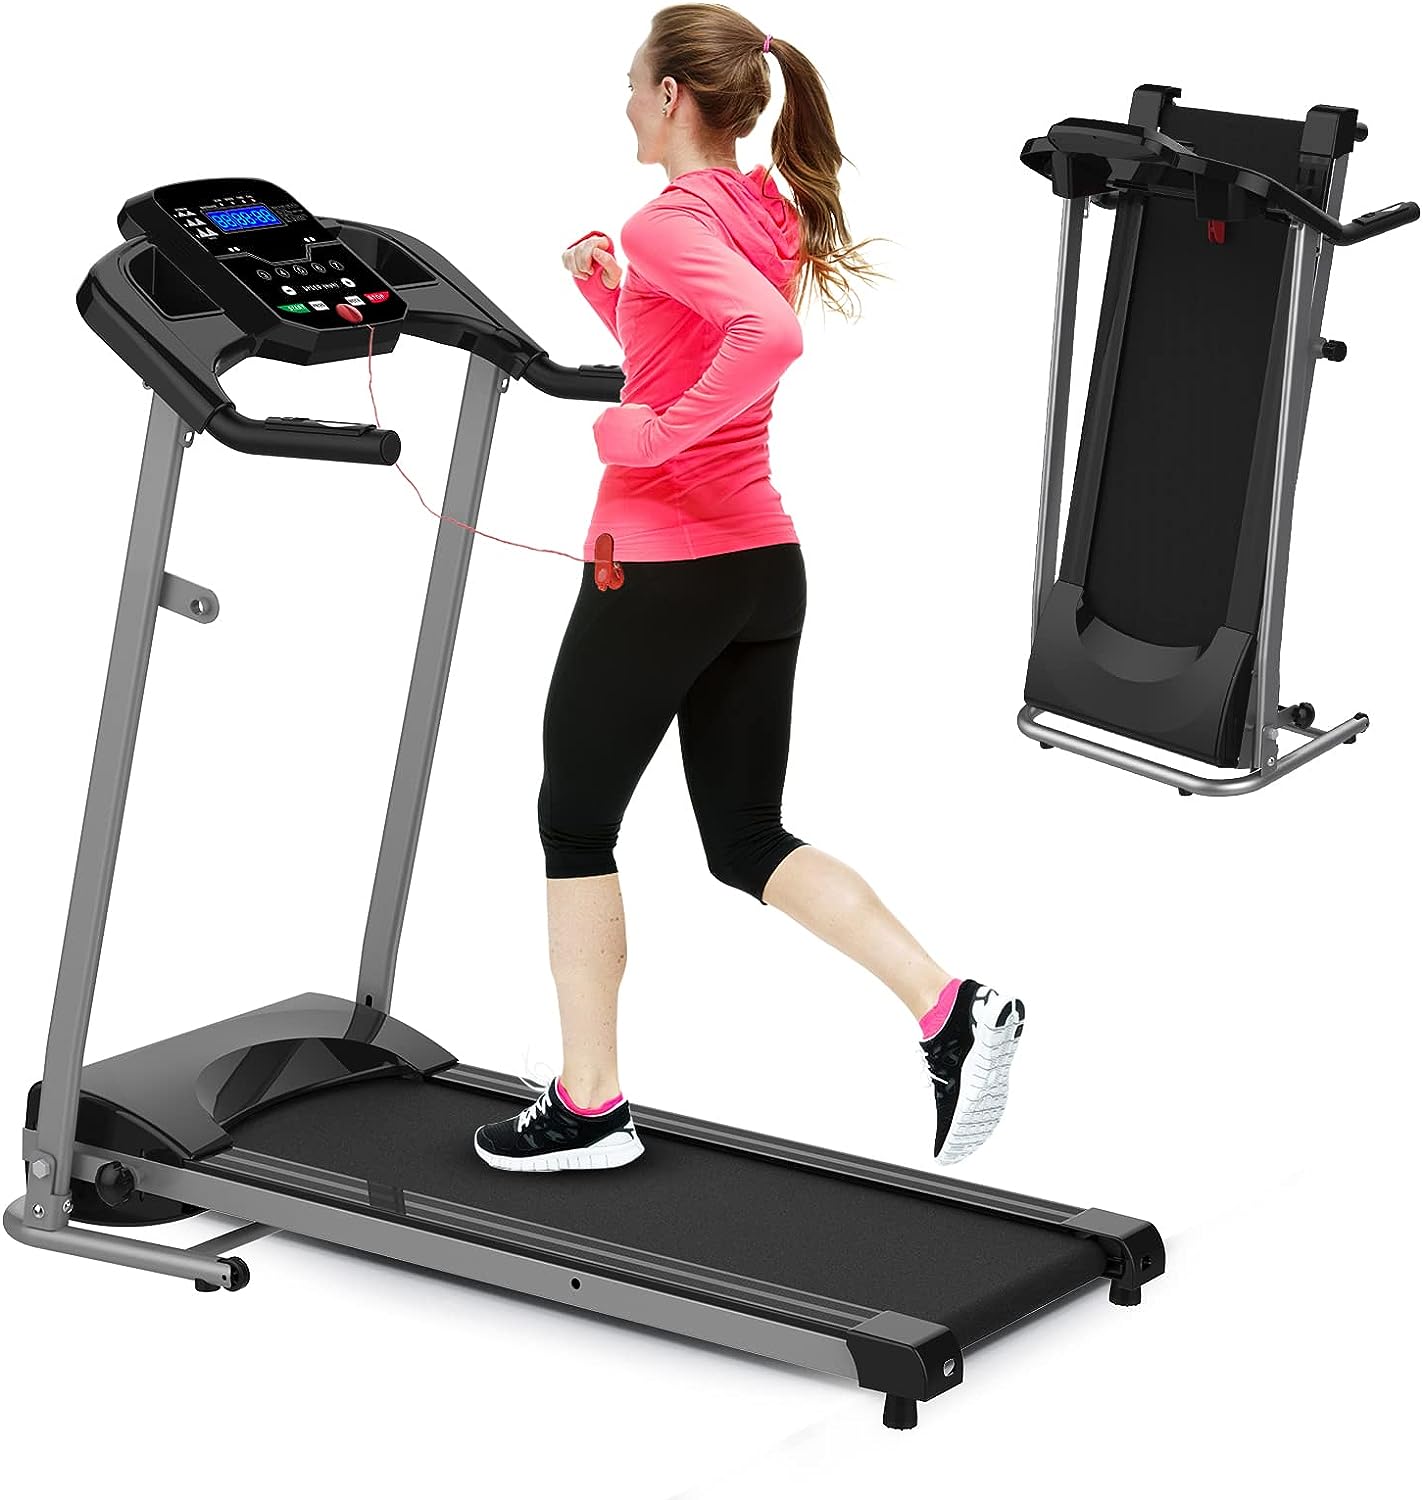 XMKEY Folding Treadmill-Walking Pad-Treadmills for Home-2.5 HP Portable Electric Foldable Treadmill with Incline Running Exercise Machine Compact Treadmill Fitness Workout Jogging Walking